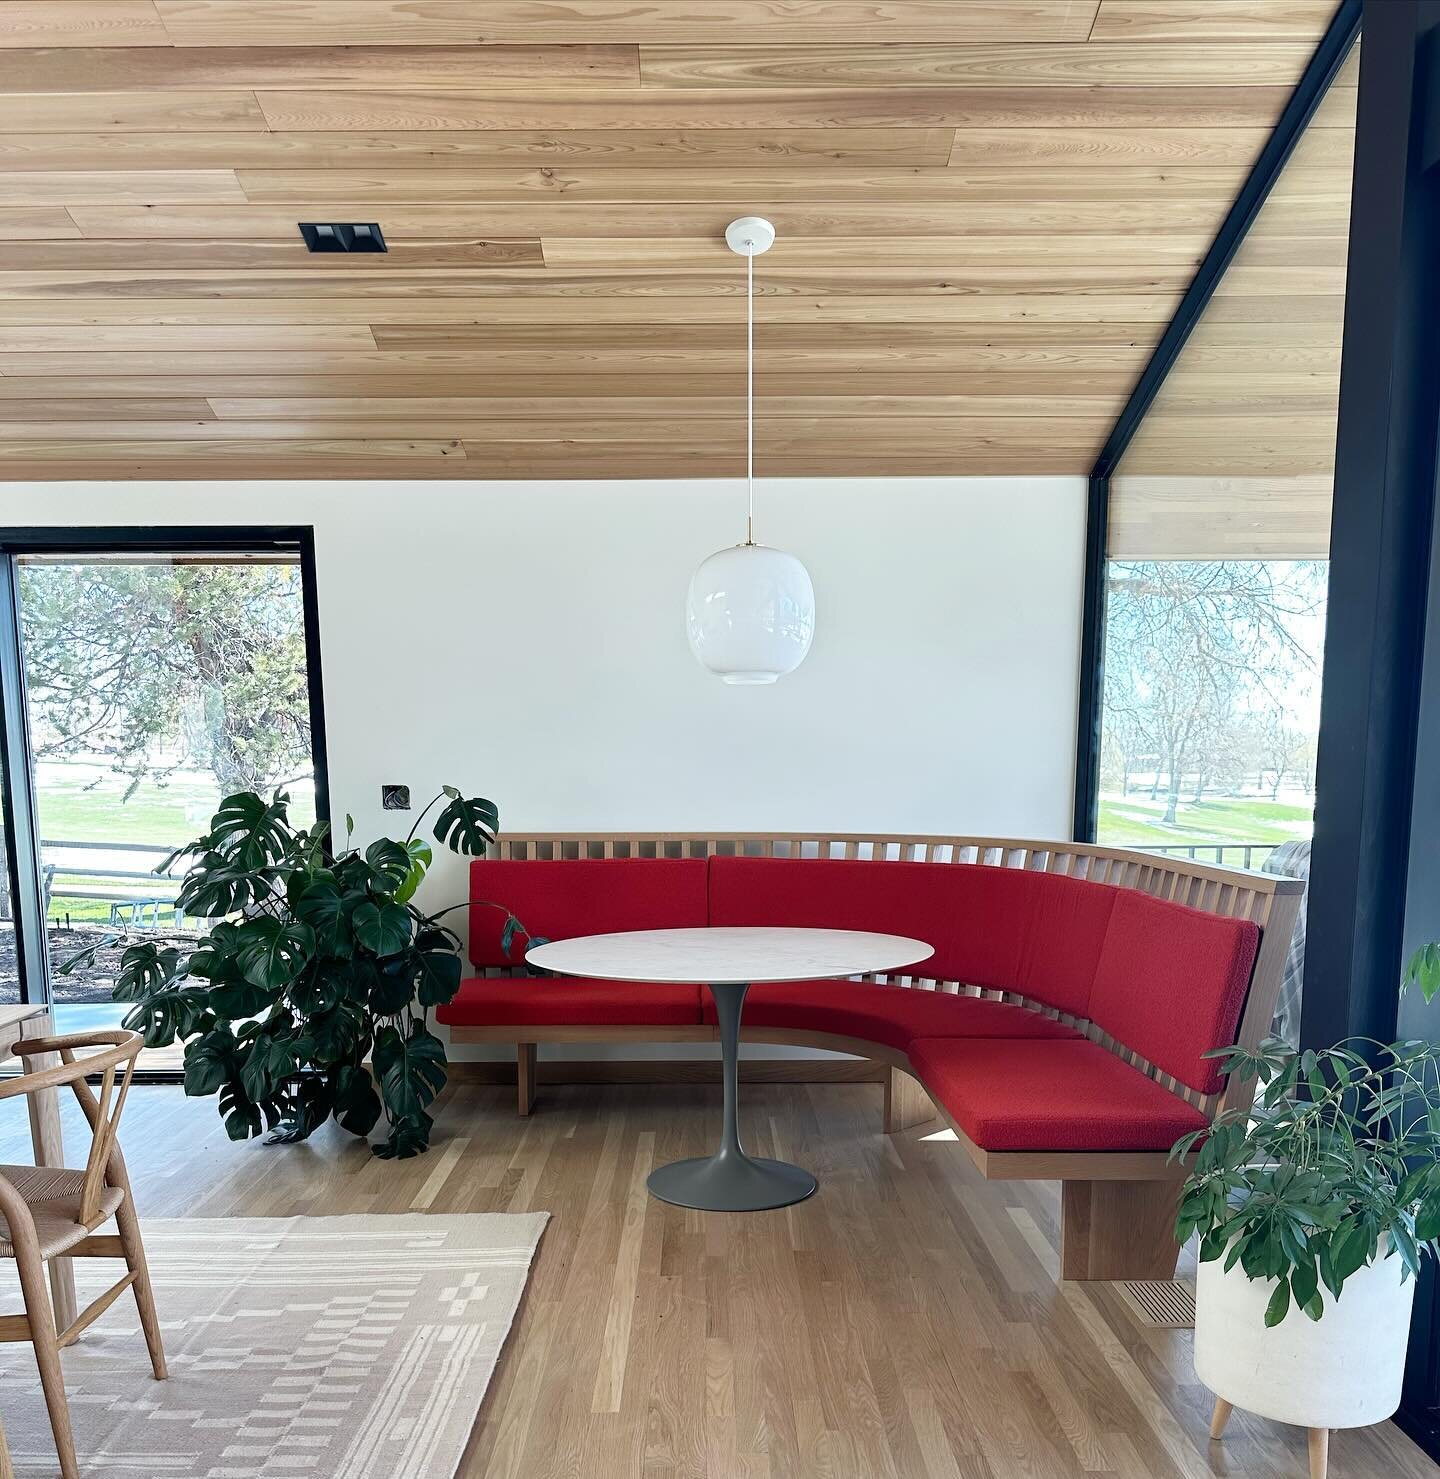 We love a dining nook! This one at our Reed project has quickly become our favorite corner of the house. This bench was a labor of love to get just right, swipe to see the progression of its build. 

A big thanks to @sheepdoggoods for bringing this d